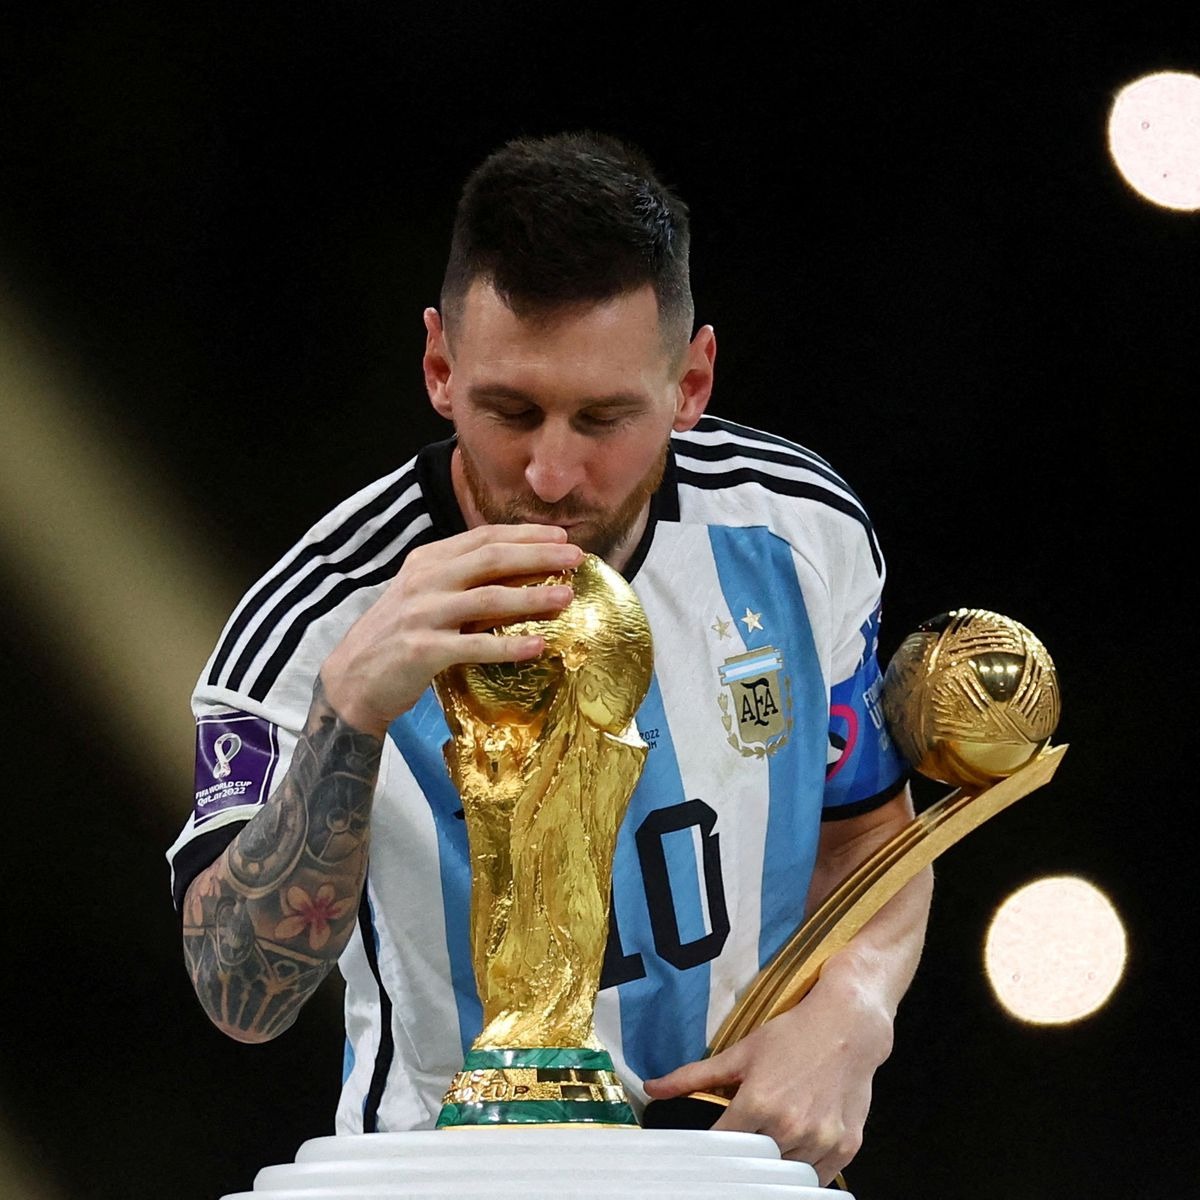 Messi sent Argentina Tshirt to Dhoni daughter ziva Pic goes viral